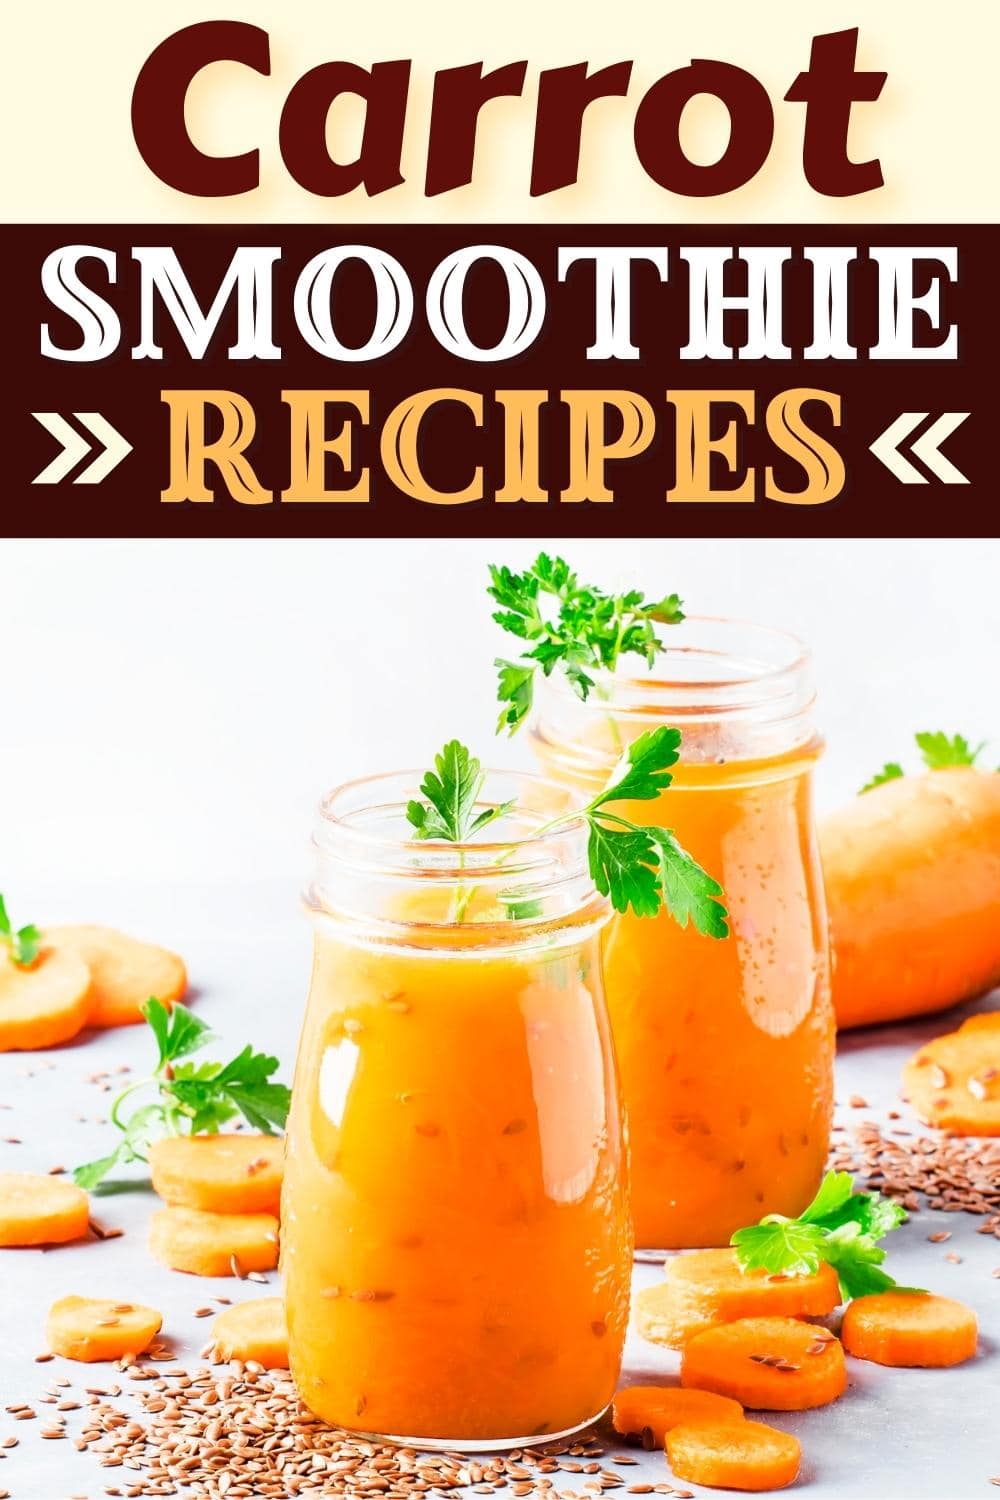 10 Easy Carrot Smoothie Recipes to Try Today - Insanely Good